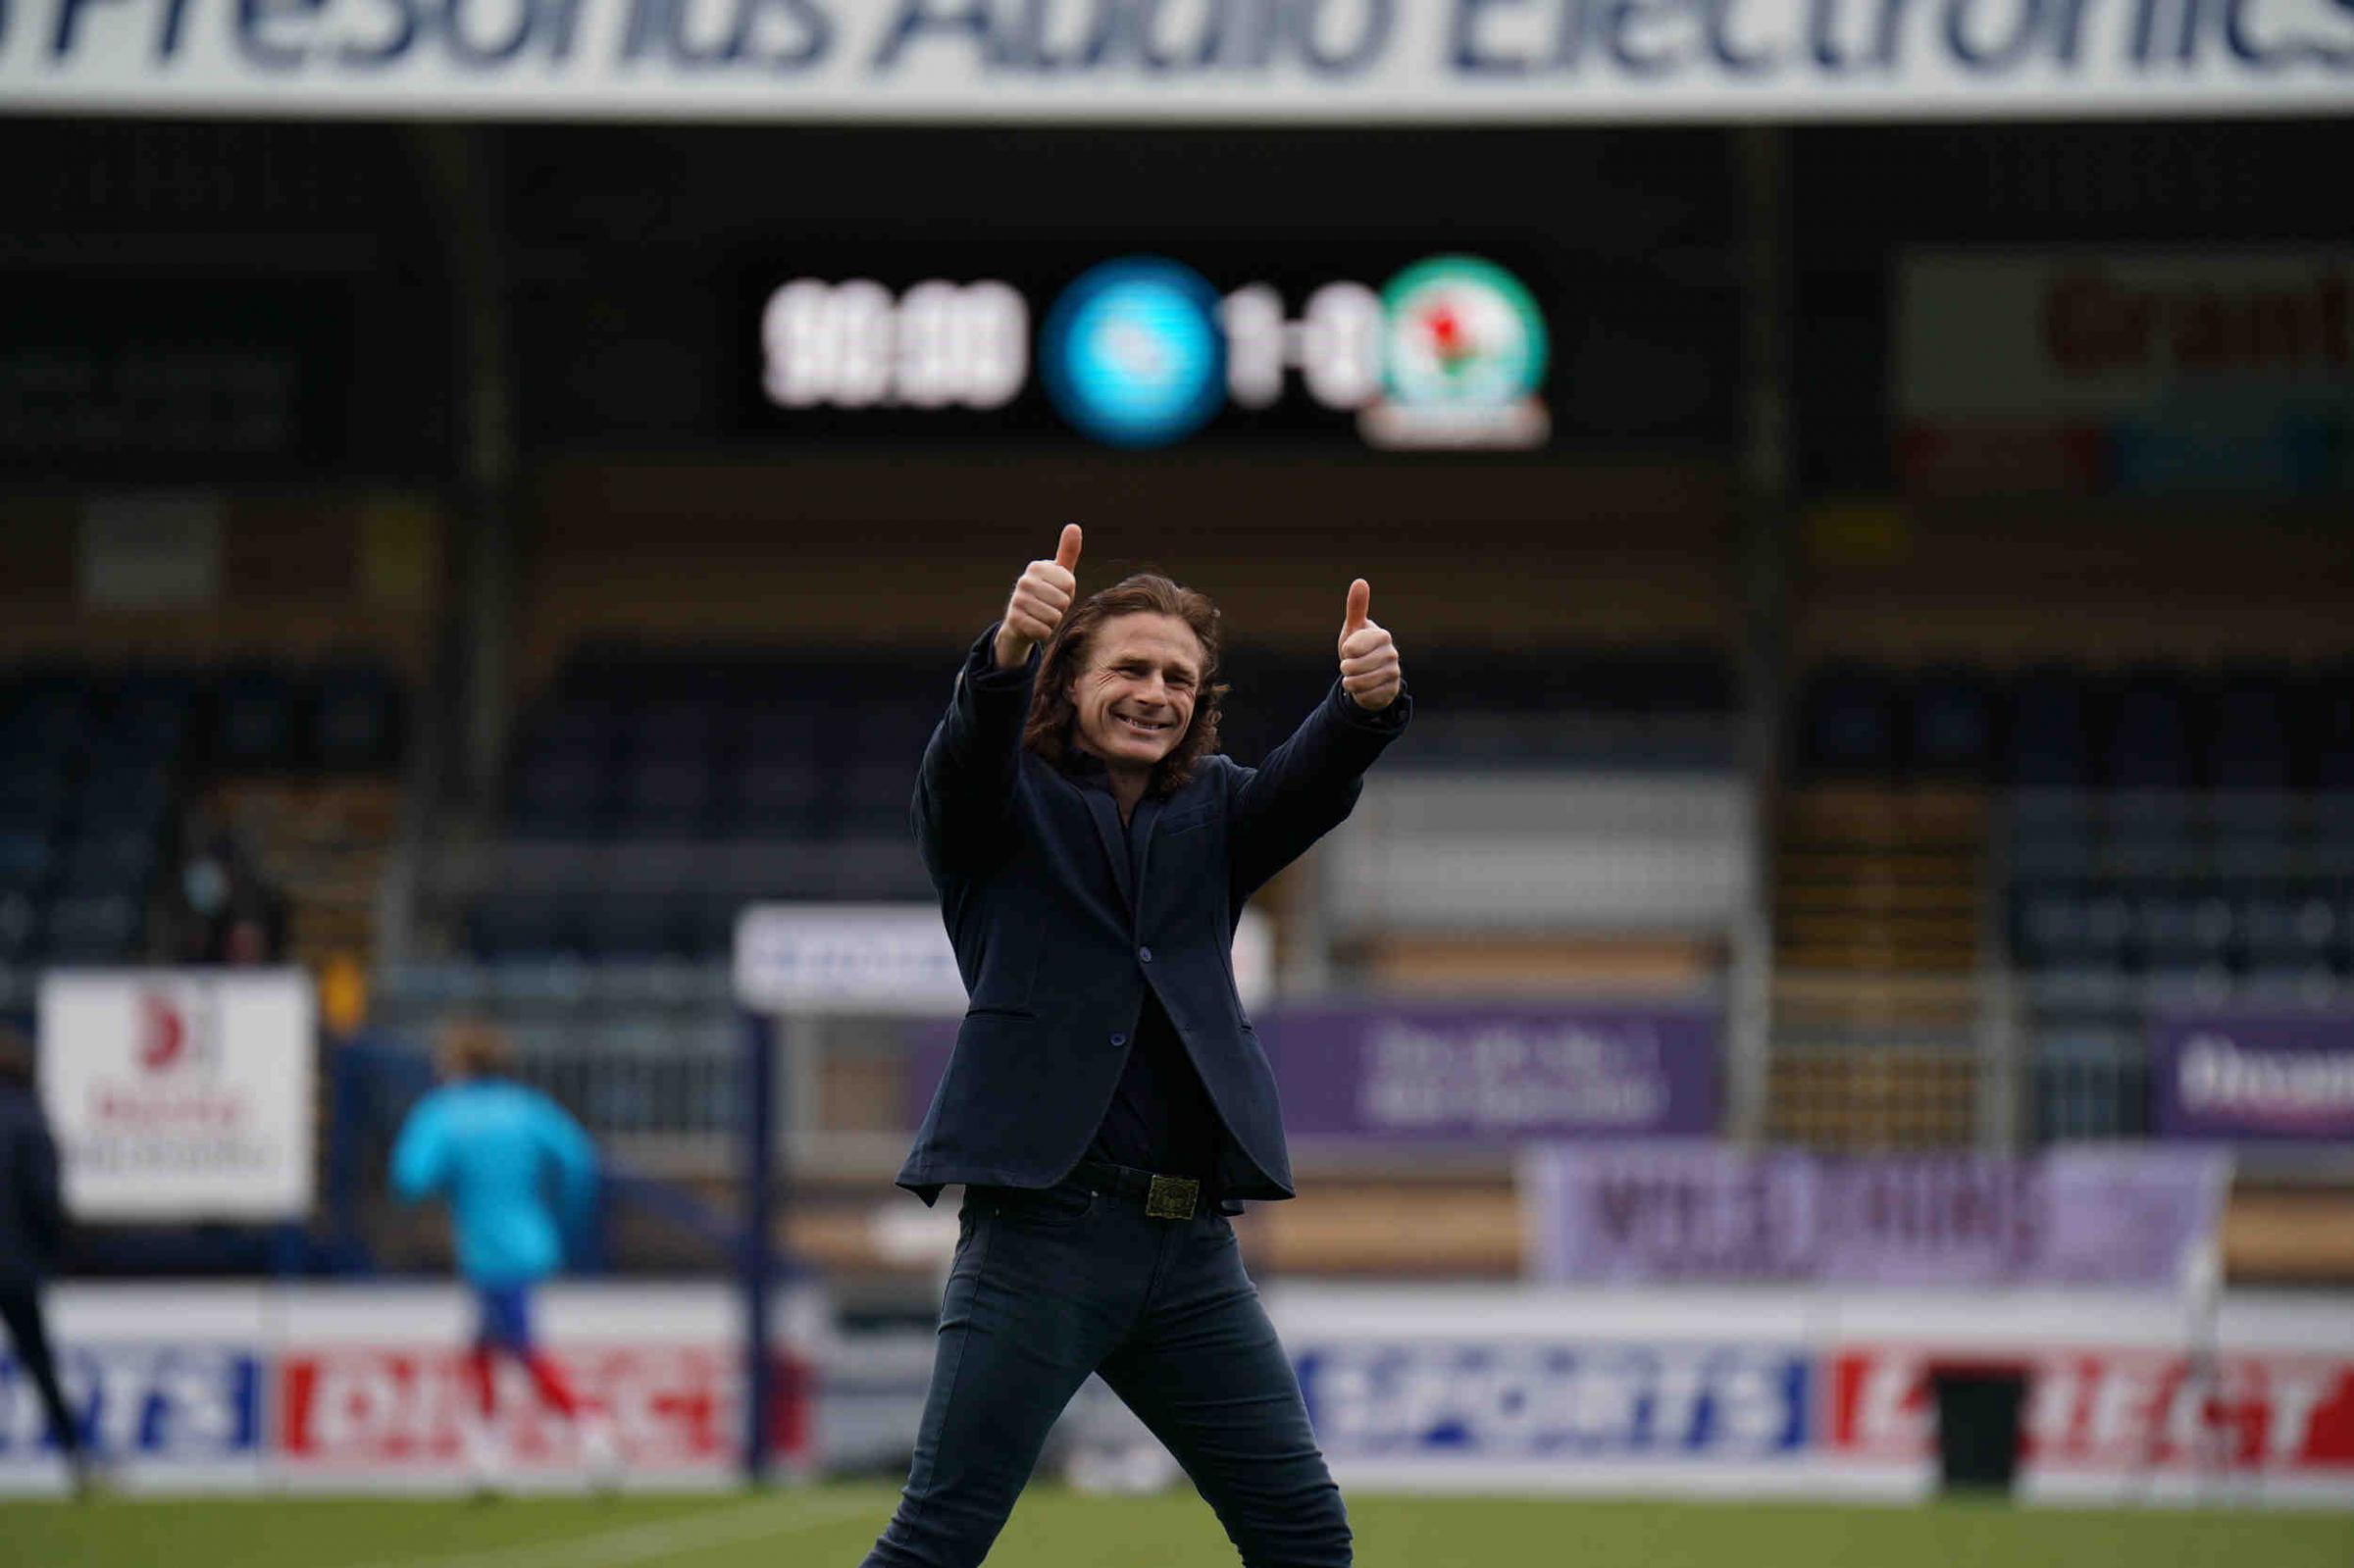 Gareth Ainsworth will be in charge of his 10th season at Wanderers in 2021/22 (Prime Media)